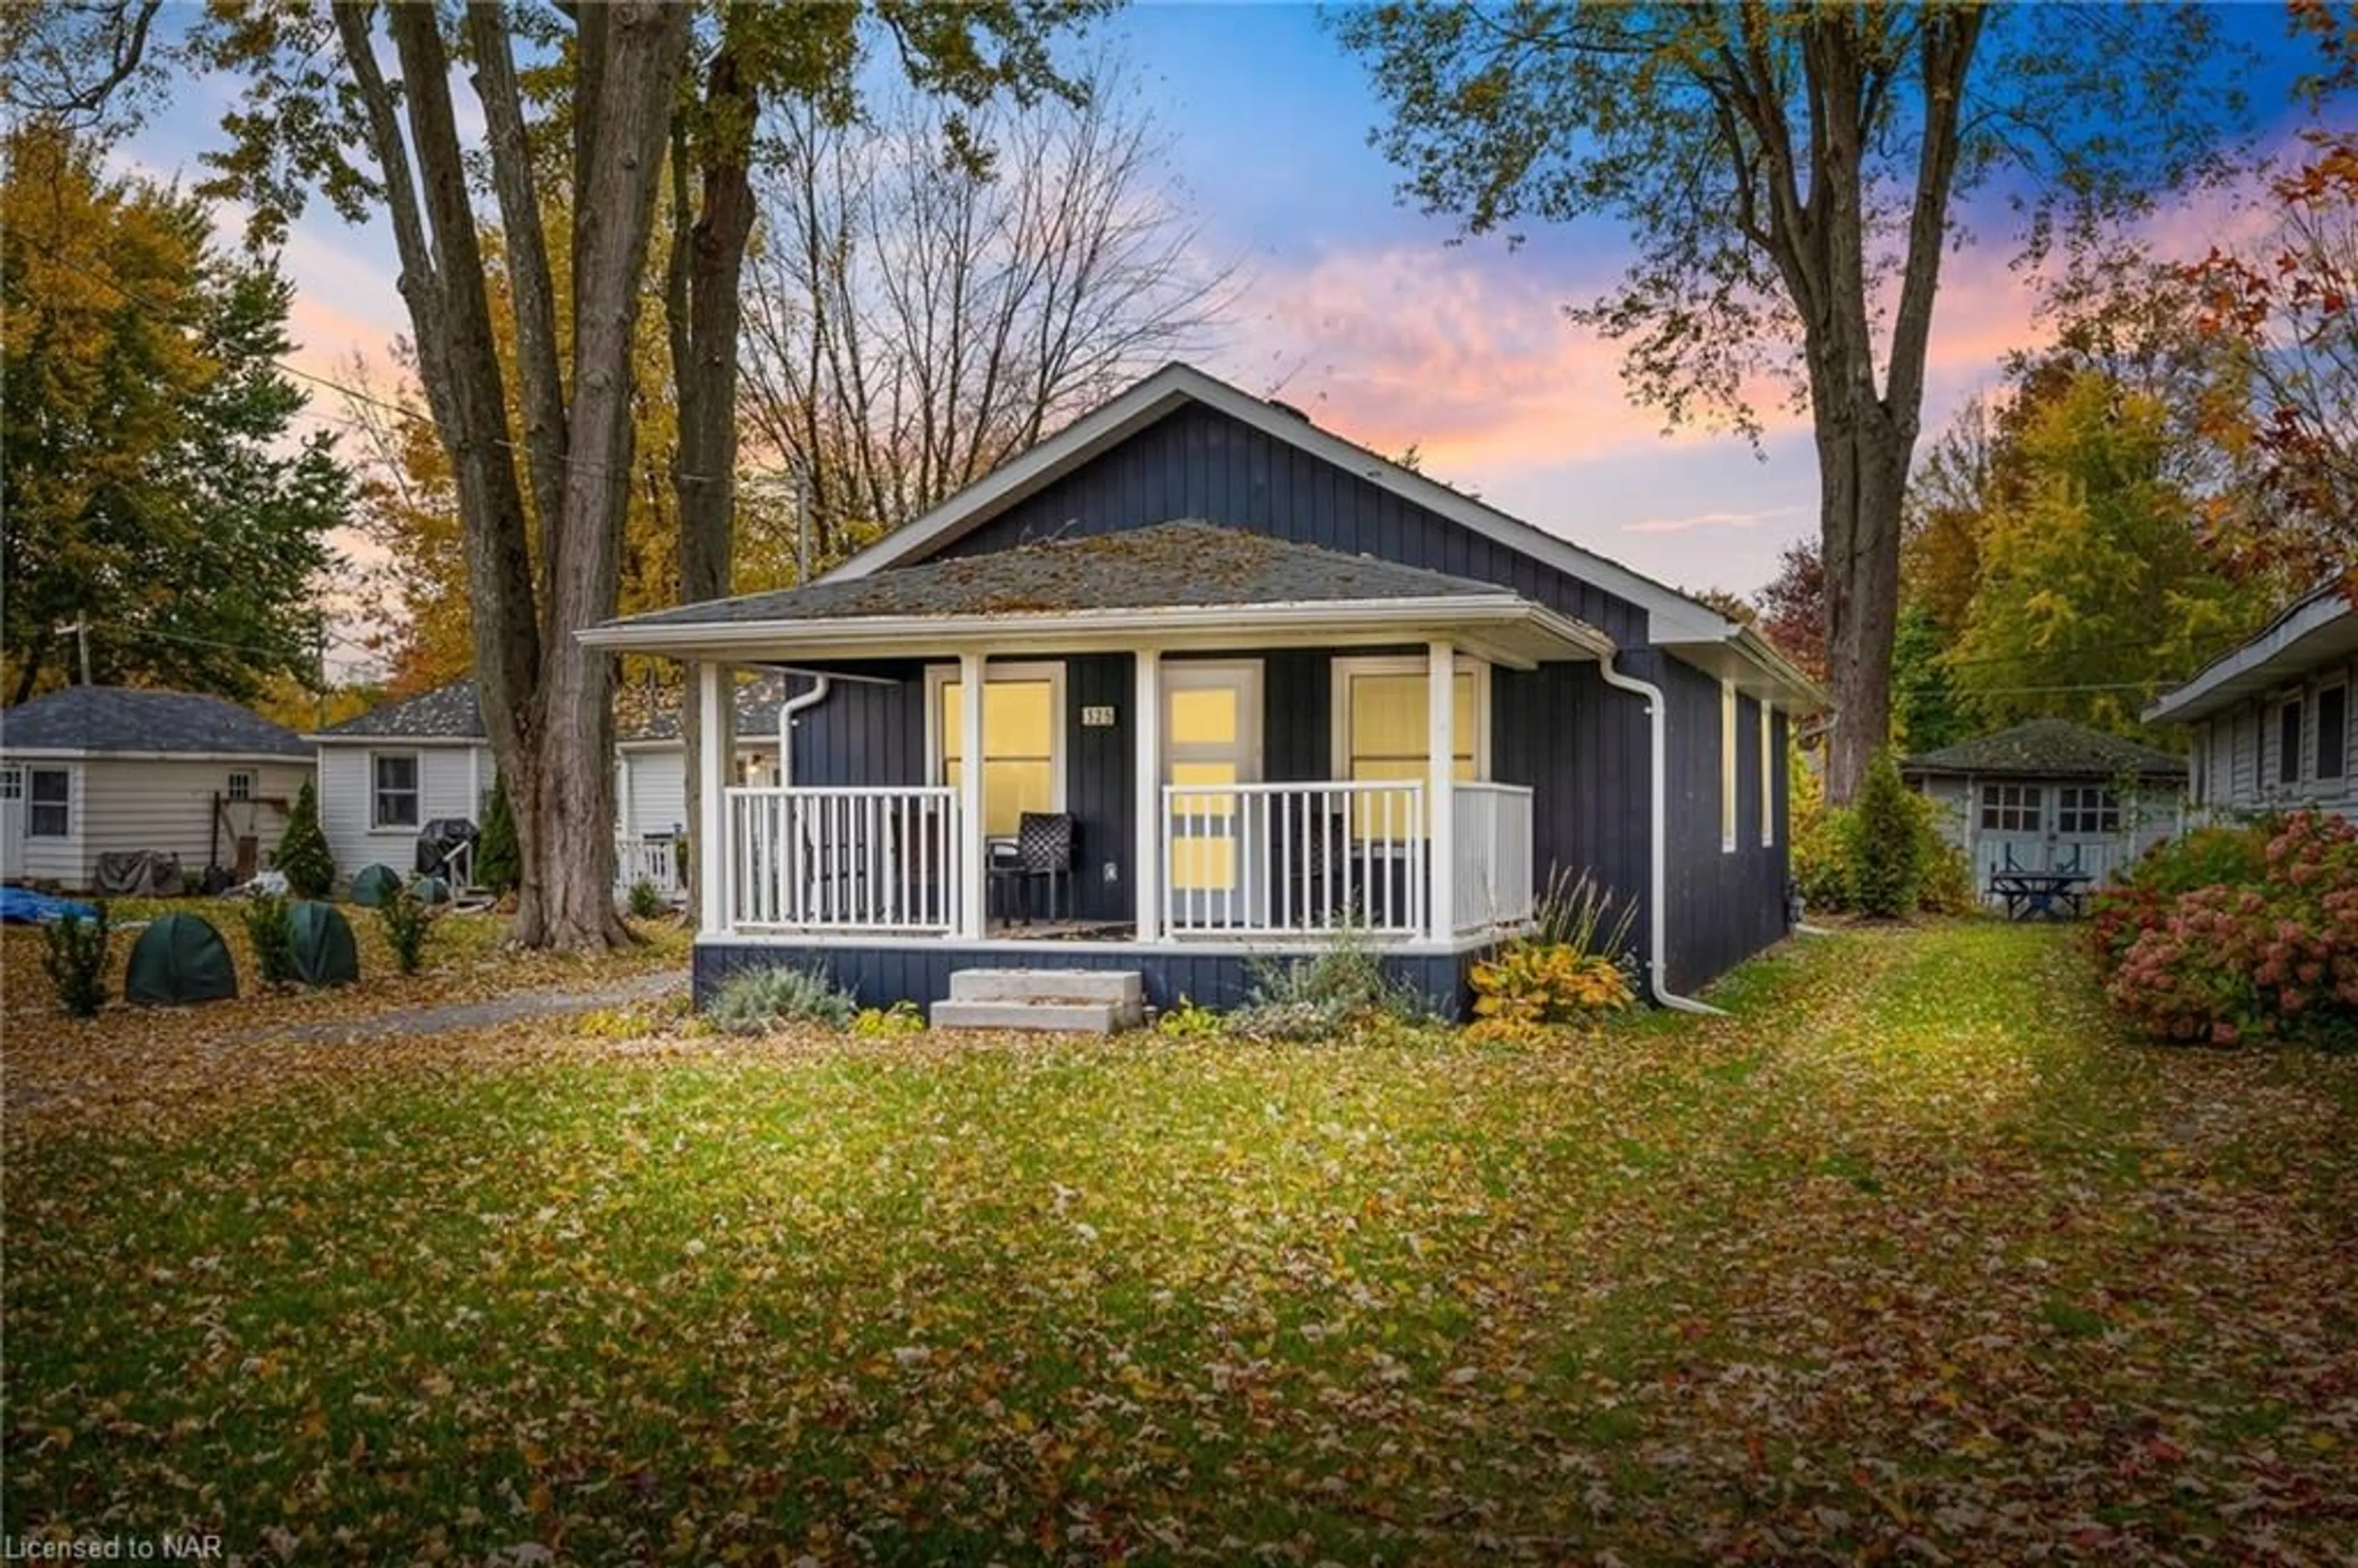 Cottage for 325 Lakewood Ave, Crystal Beach Ontario L0S 1B0